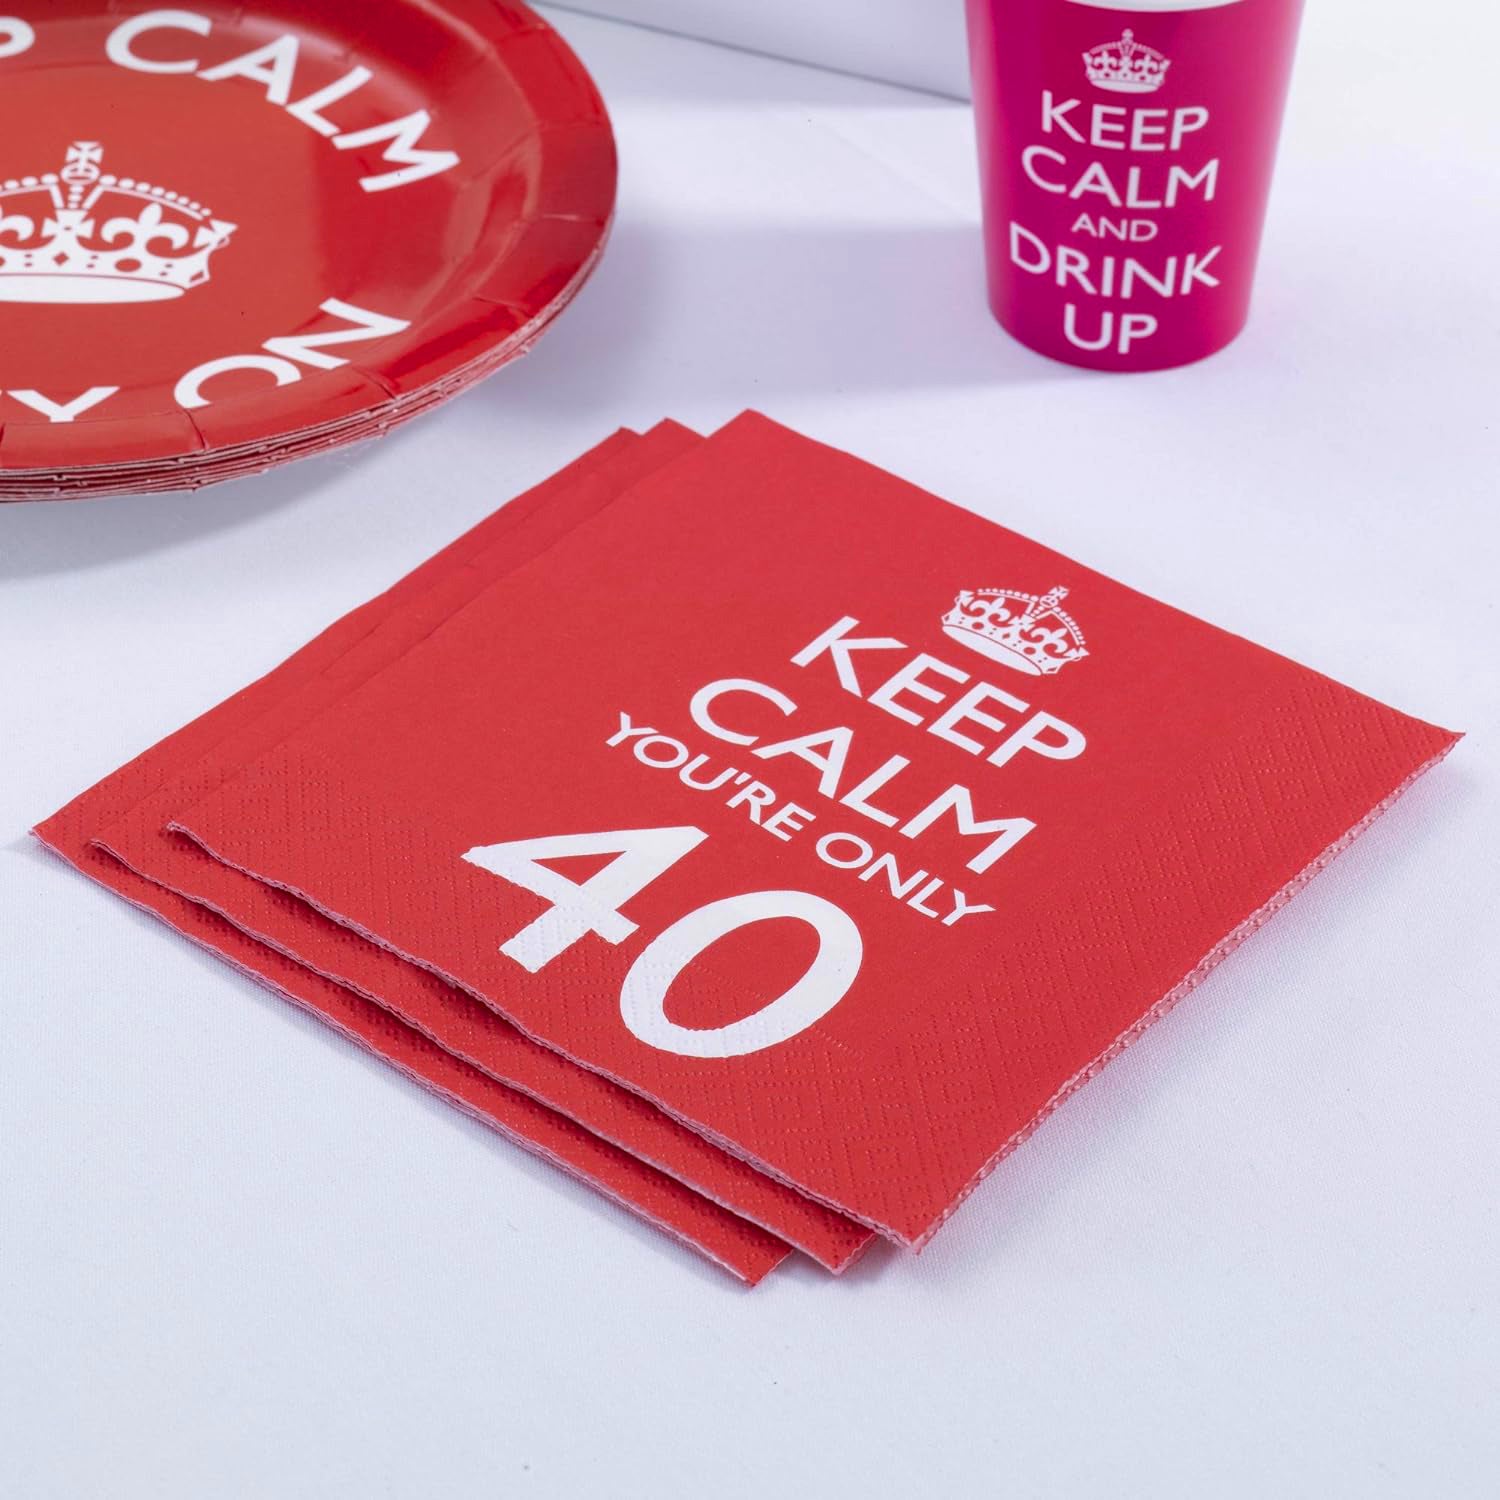 Keep Calm You're Only 40 Paper Napkins - Pack of 16